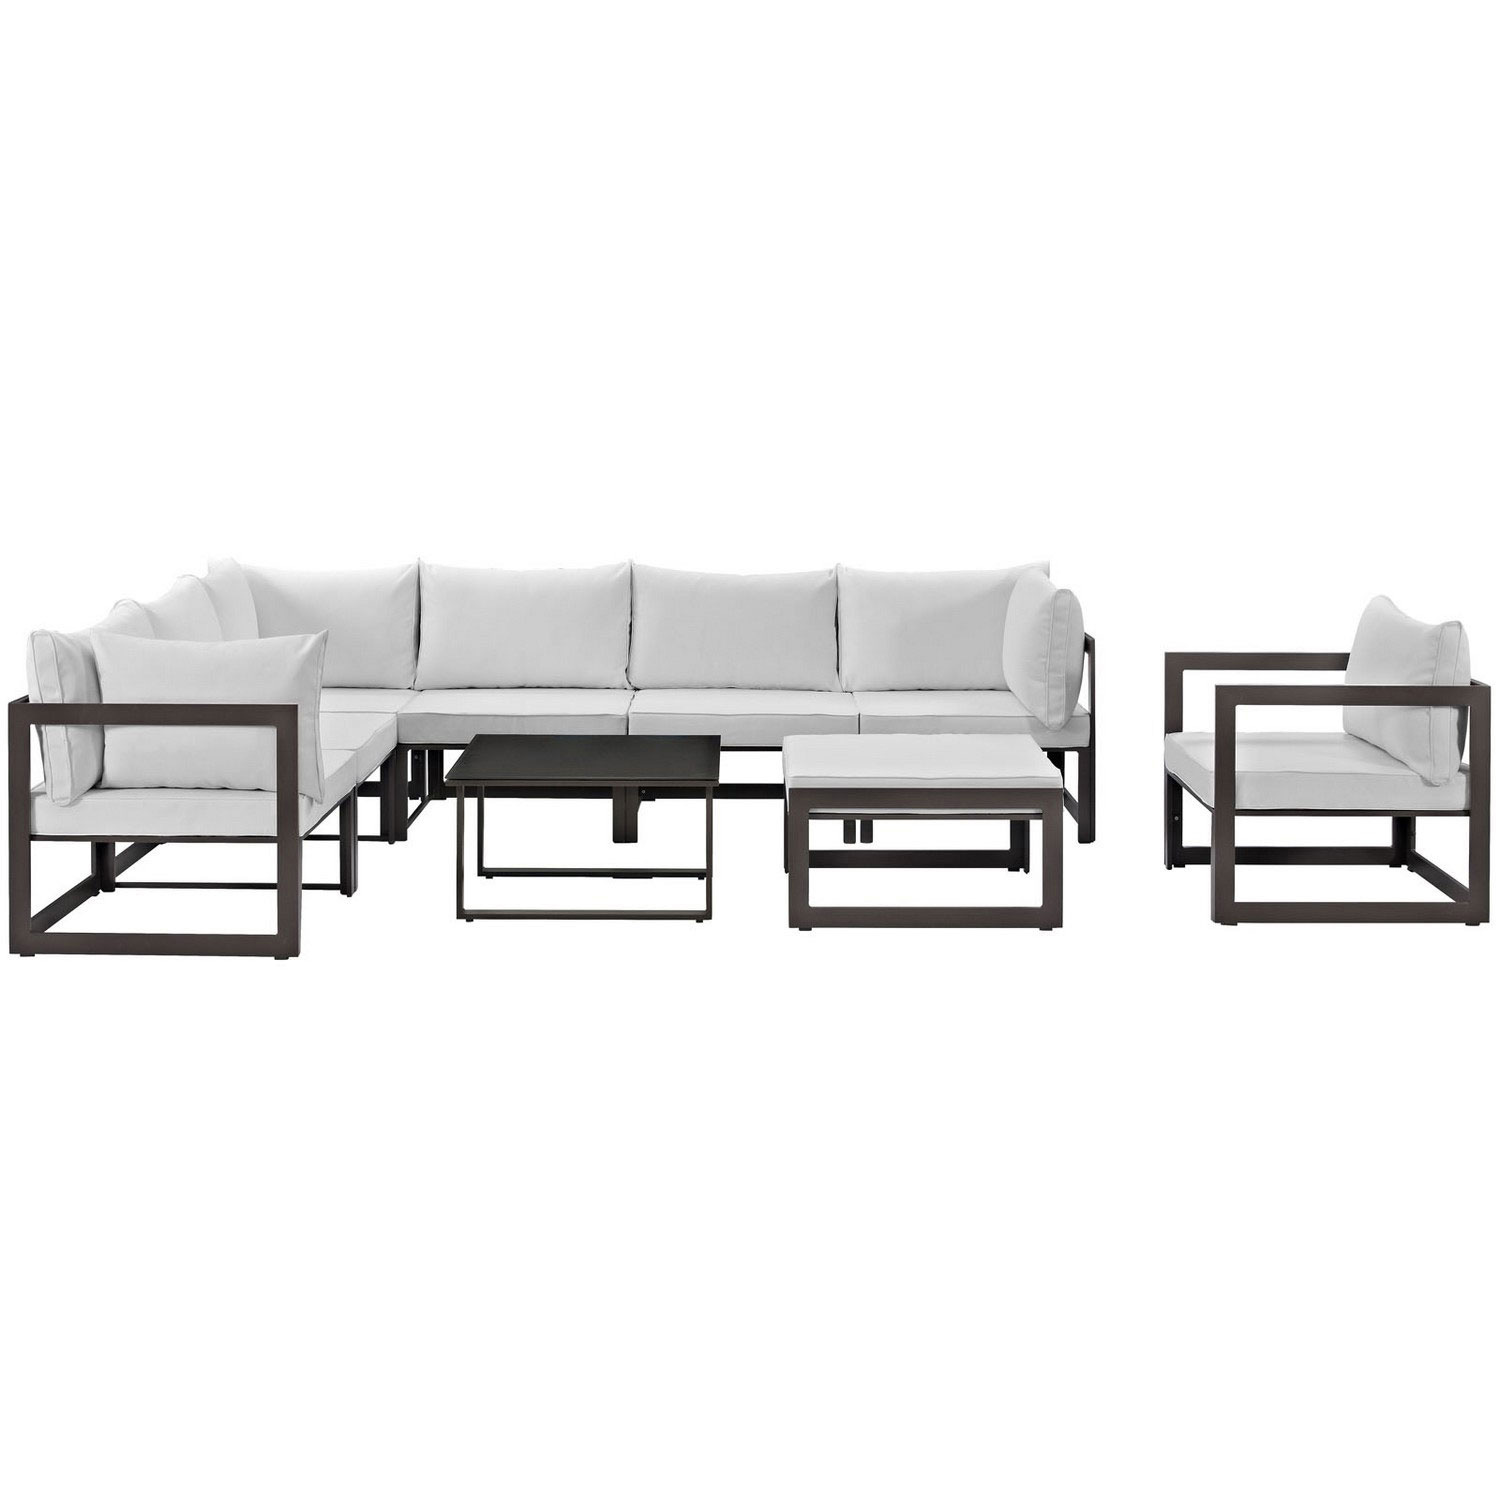 Modway Fortuna 9 Piece Outdoor Patio Sectional Sofa Set - Brown/White